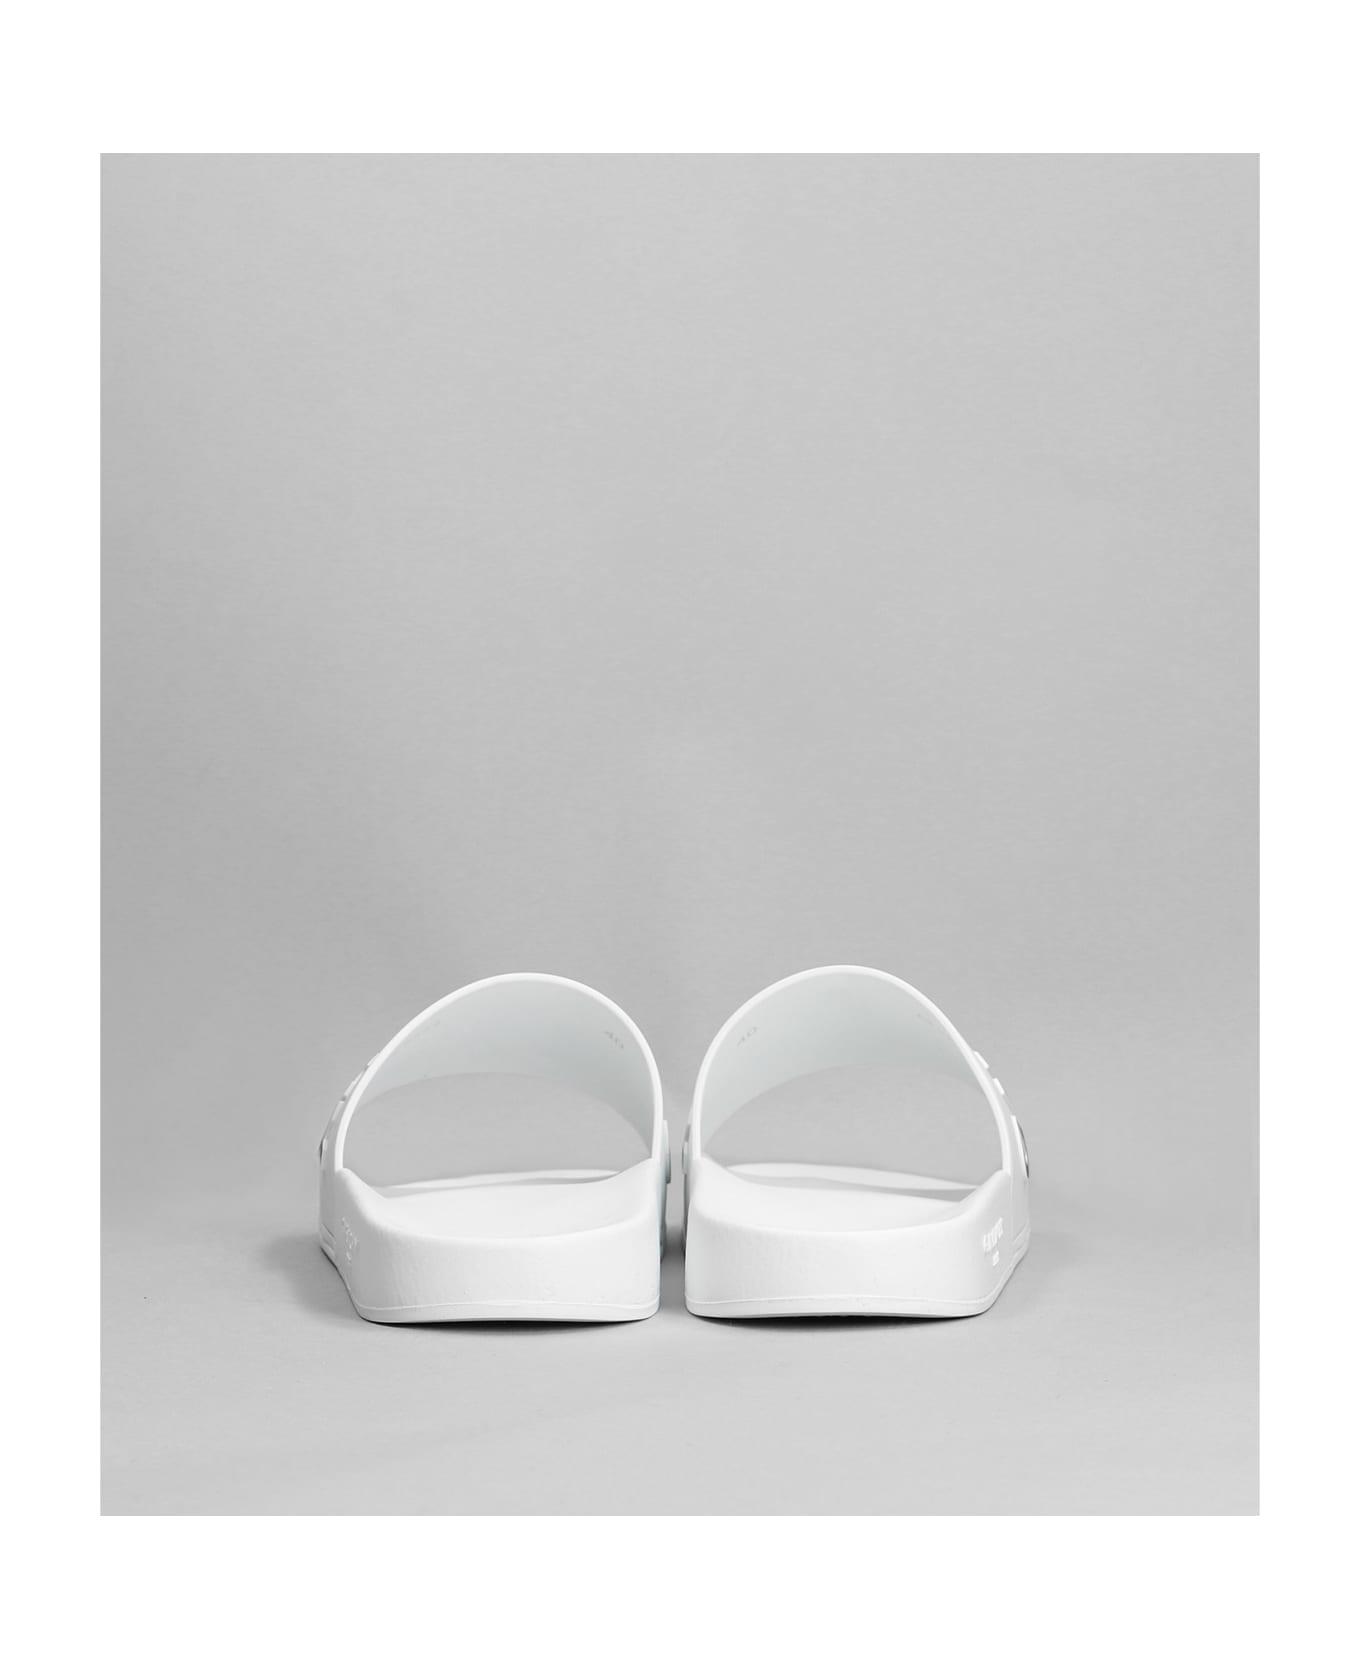 Givenchy Flats In White Rubber/plasic - white